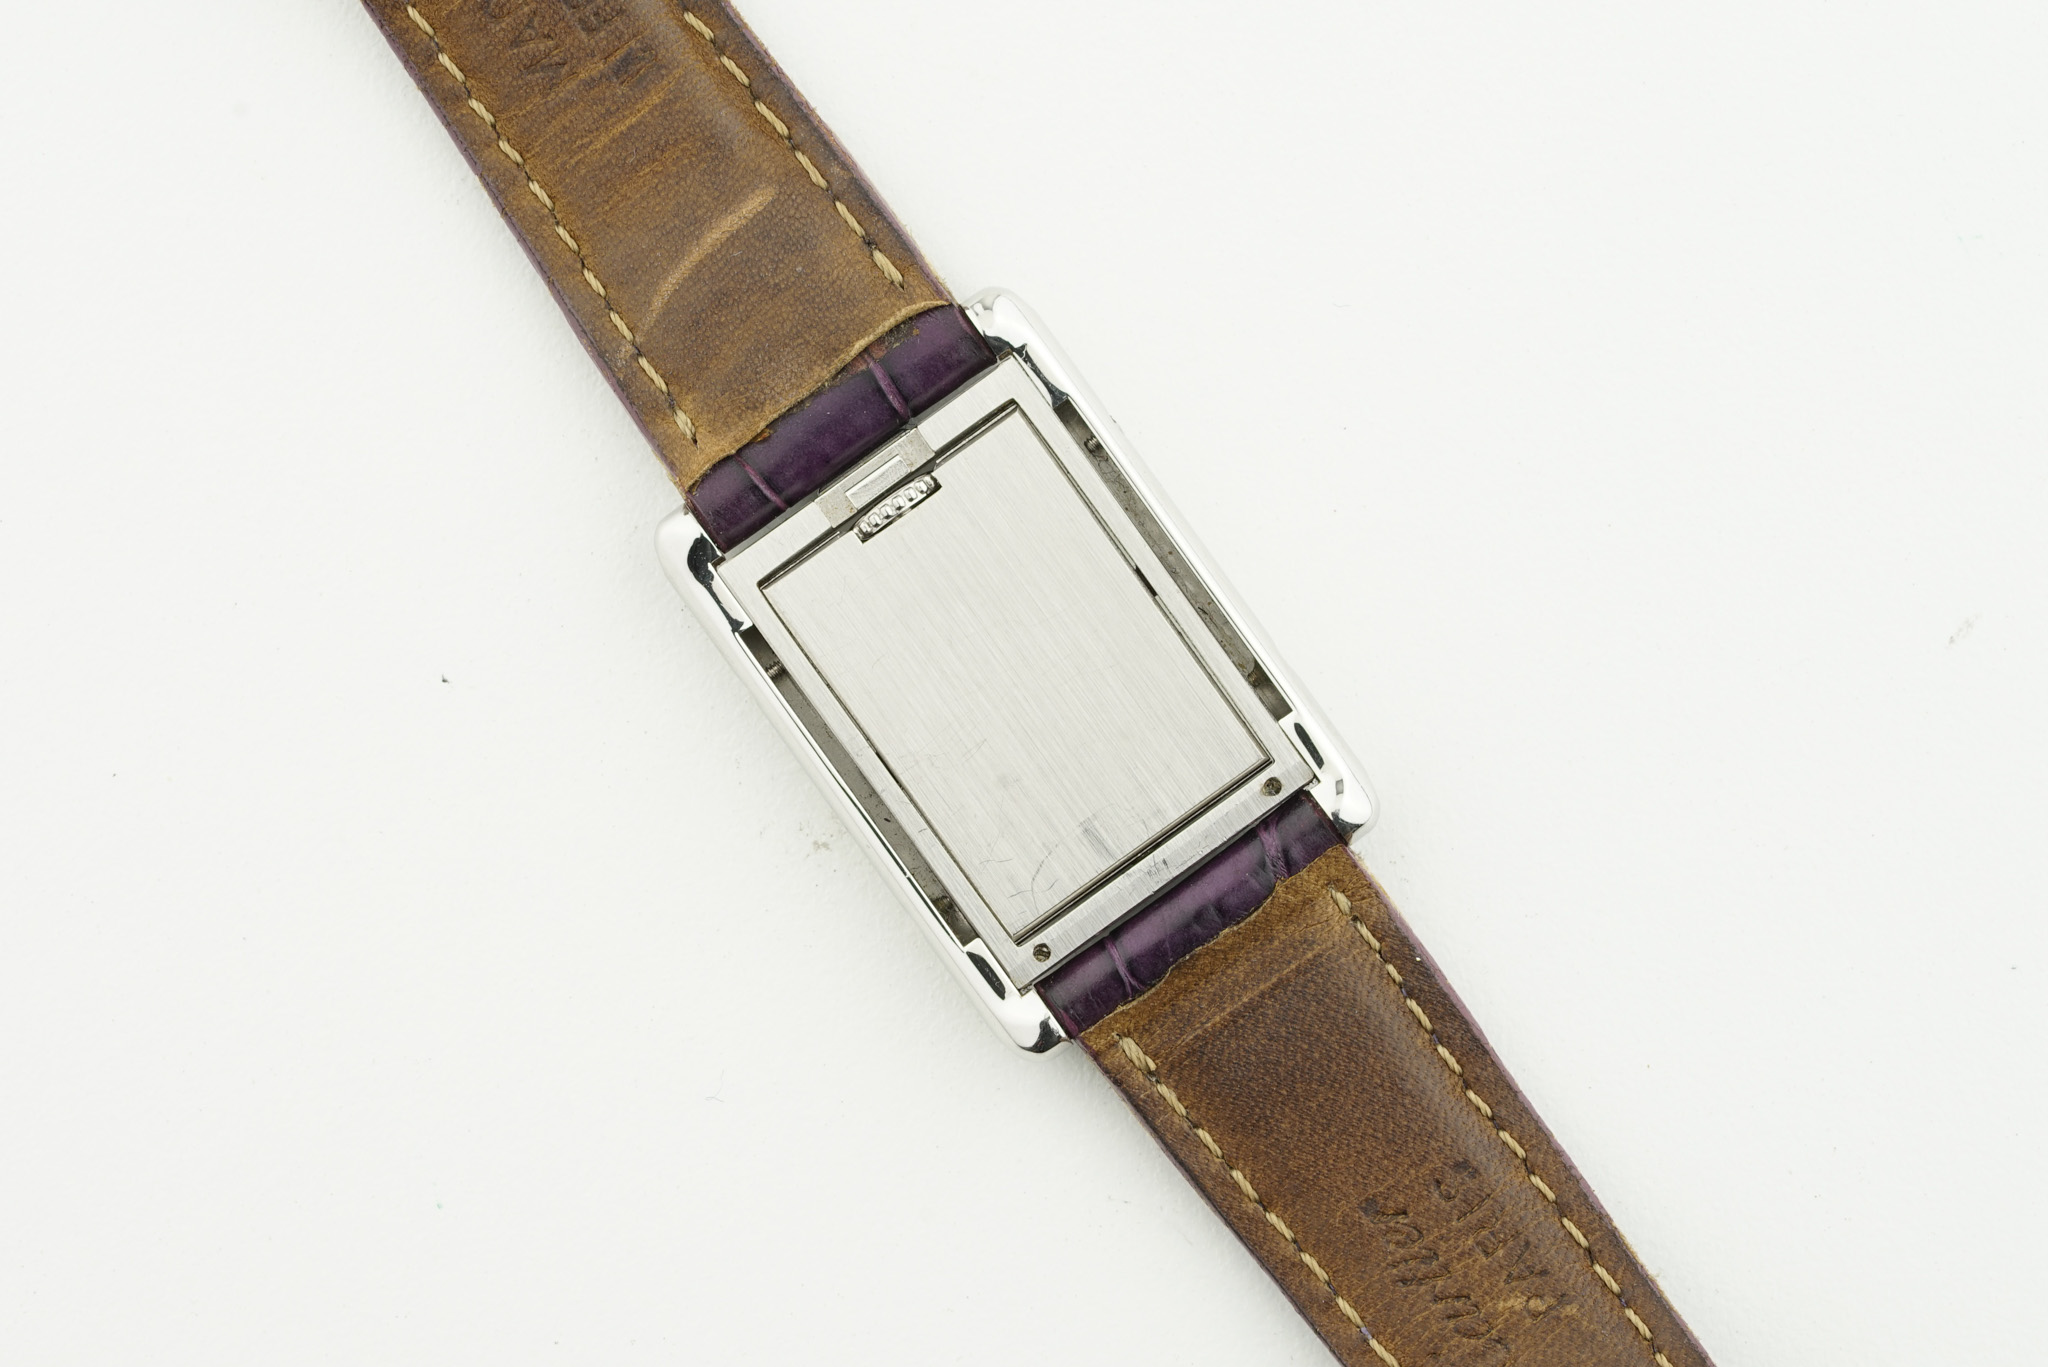 CARTIER TANK BASCULANTE W/ GUARANTEE PAPERS REF. 2386, rectangular dial with hour markers and hands, - Image 3 of 3